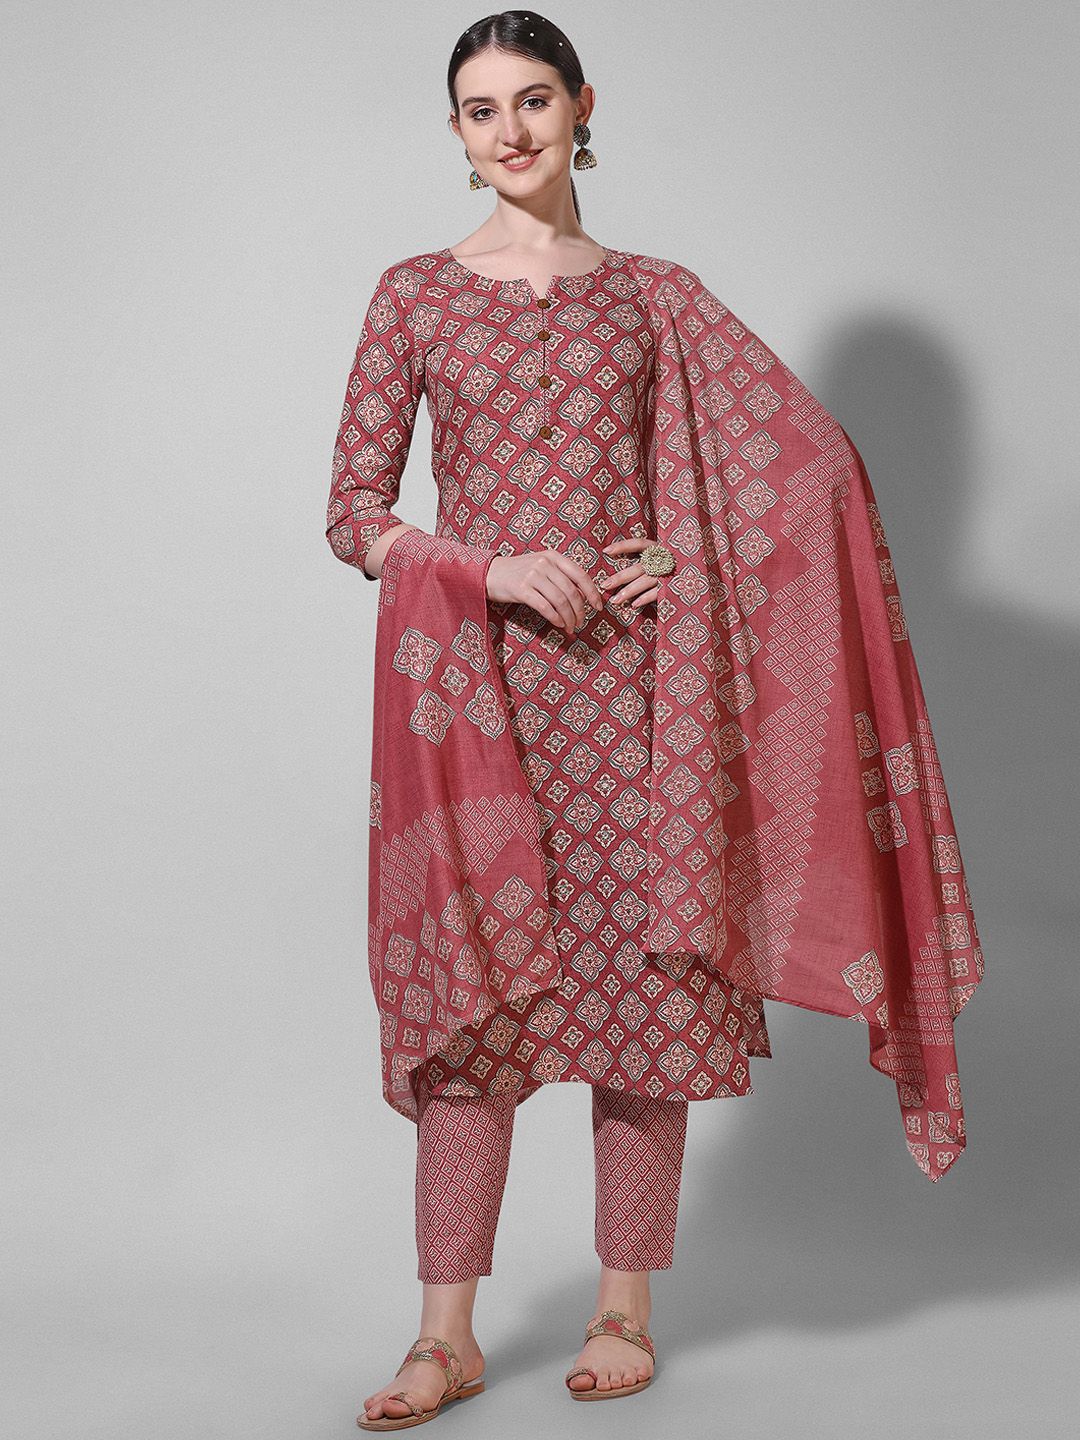 Berrylicious Ethnic Motifs Printed Pure Cotton Kurta with Trousers & Dupatta Price in India